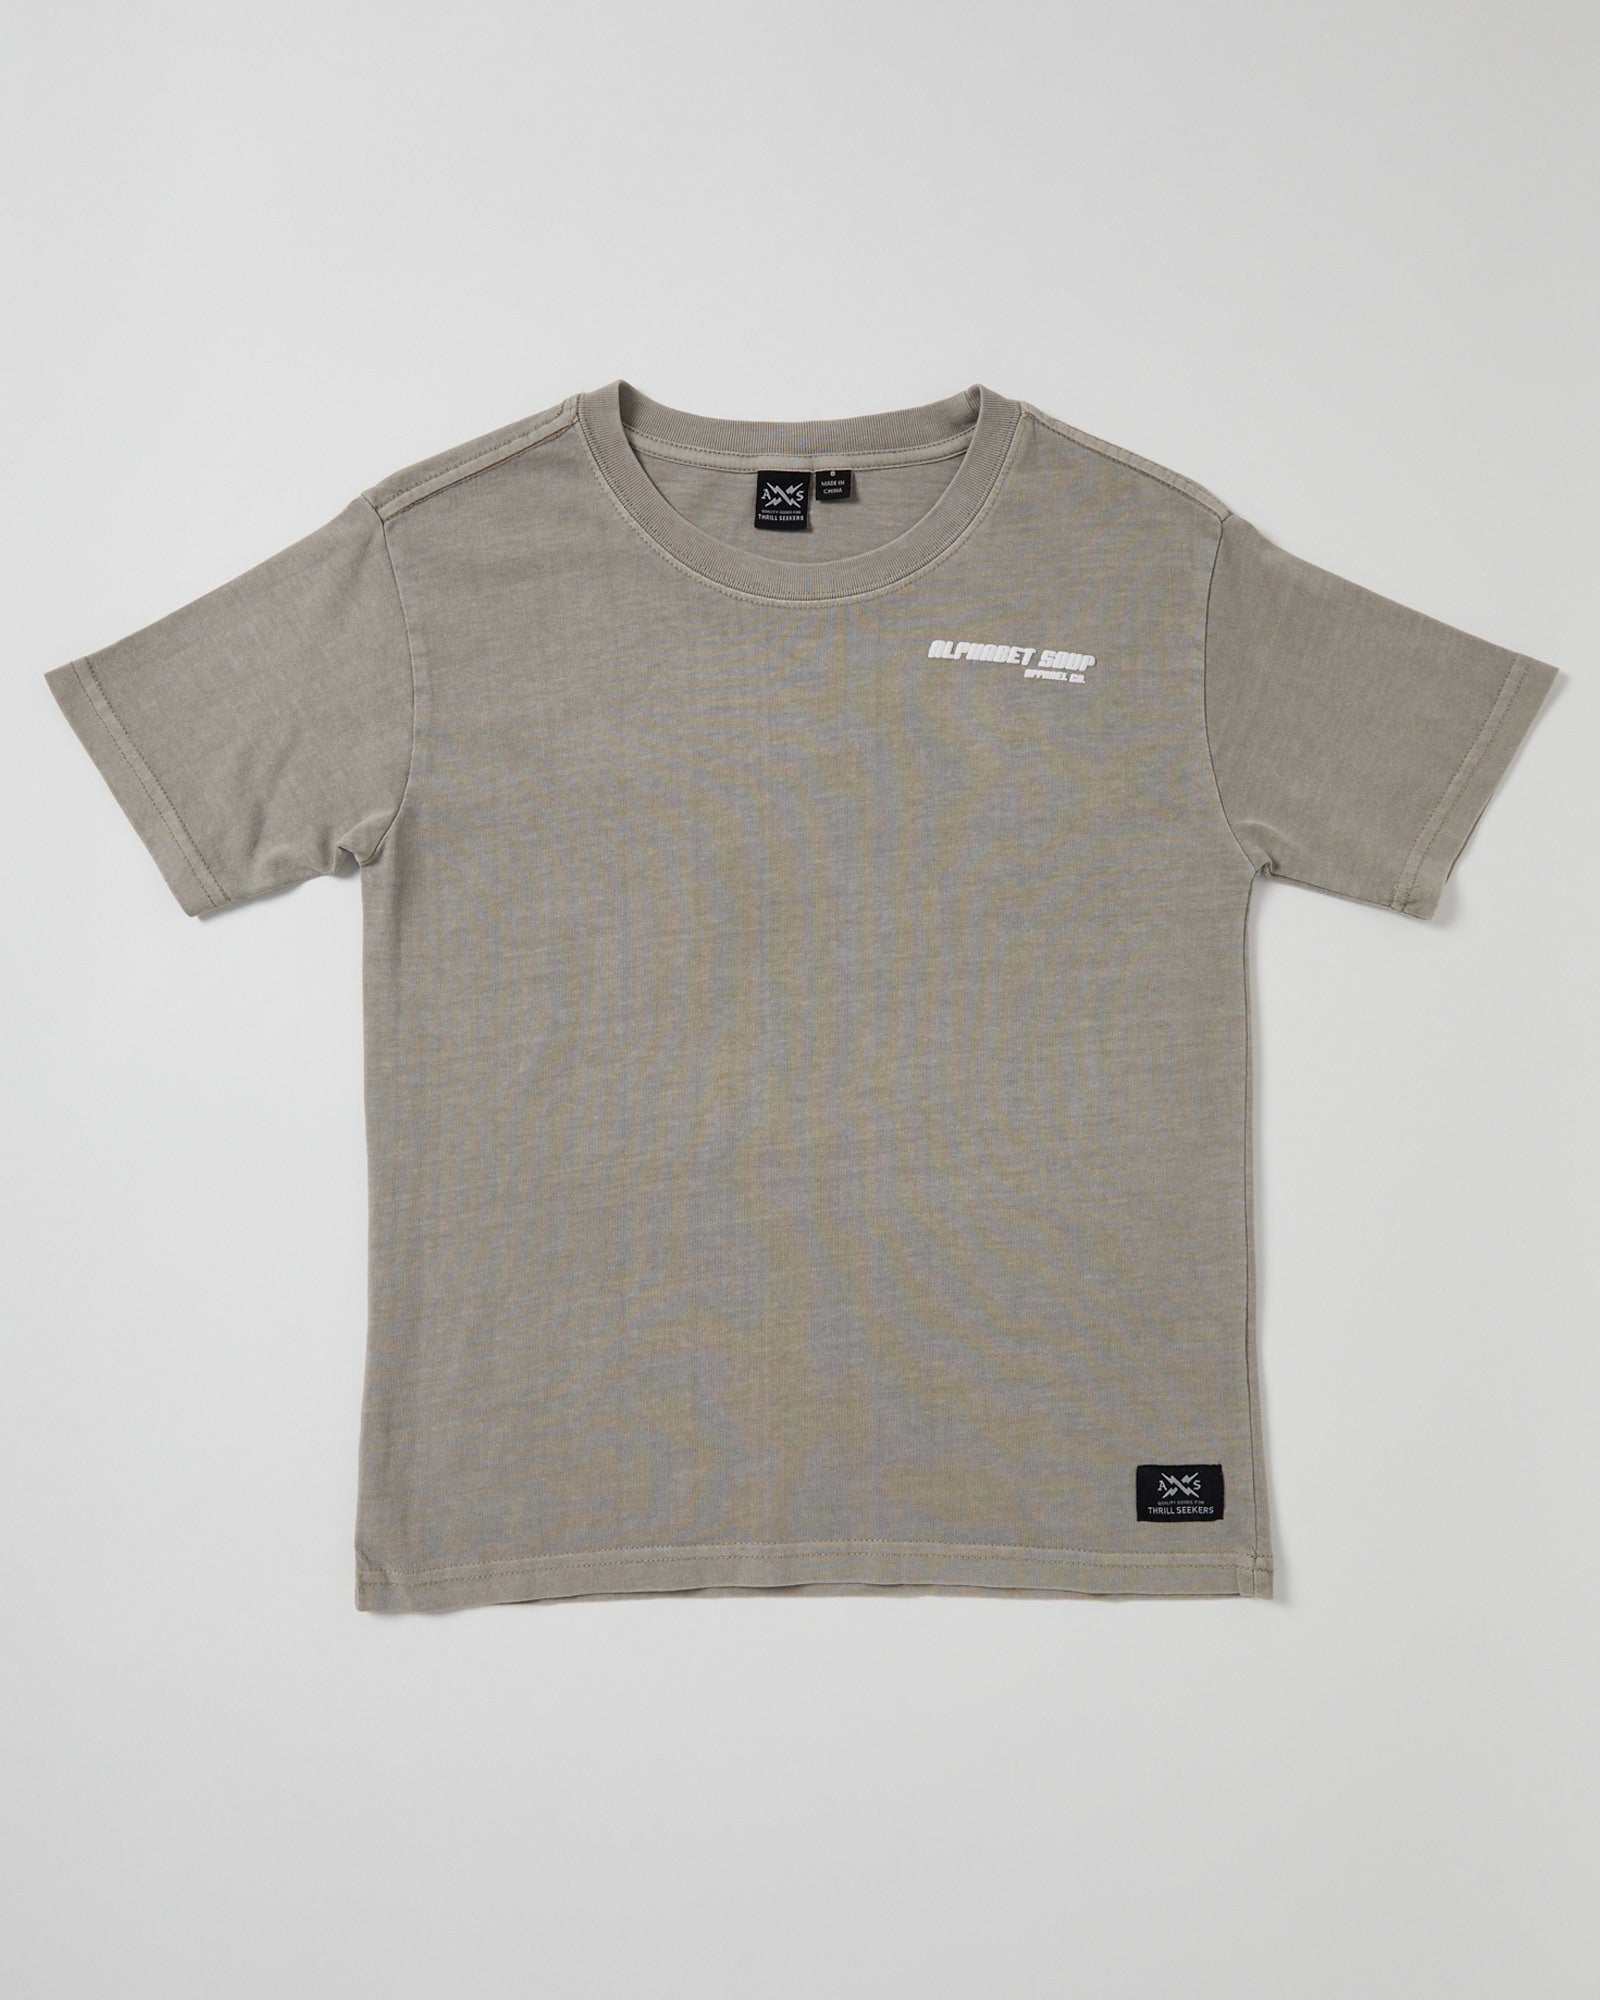 Expertly crafted using 100% cotton jersey in a unique concrete colorway, this Kids San Clemente Tee boasts a vintage garment dye wash and puff logo print on the chest and back.